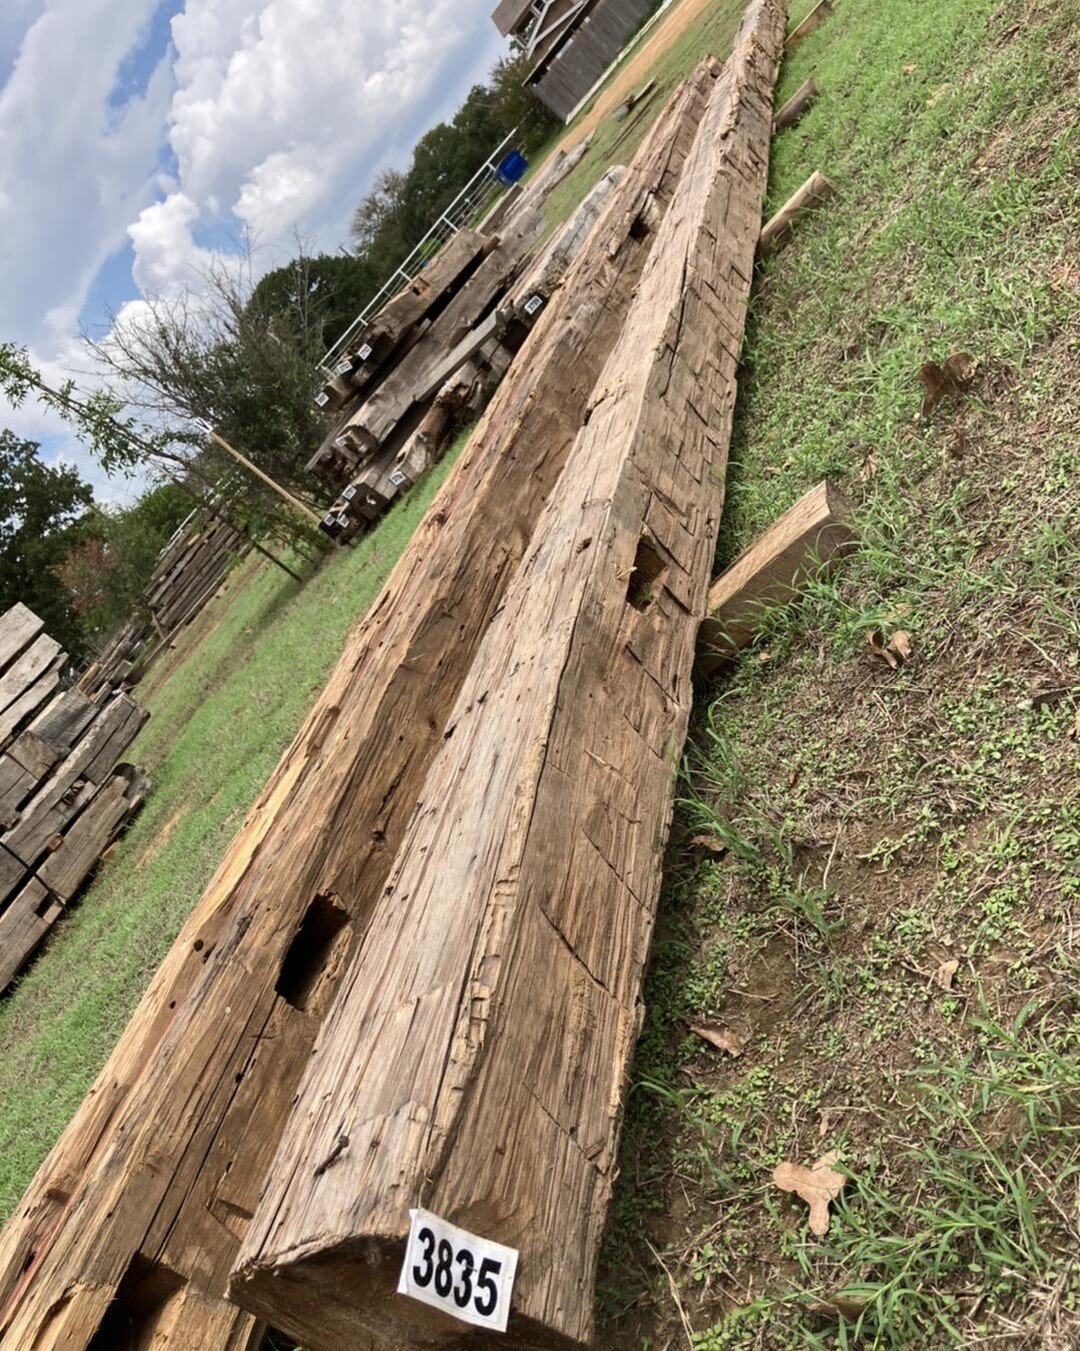 Just bringing you joy with this beautiful beams. Thank you for supporting the Buy Barn Wood. Hope everyone is enjoying your day. 
#buybarnwood 
#barnwood 
#reclaimedbeams 
#barn 
#barndecorations 
#wood 
#woodworking 
#reclaimedmantel 
#reclaimedmant